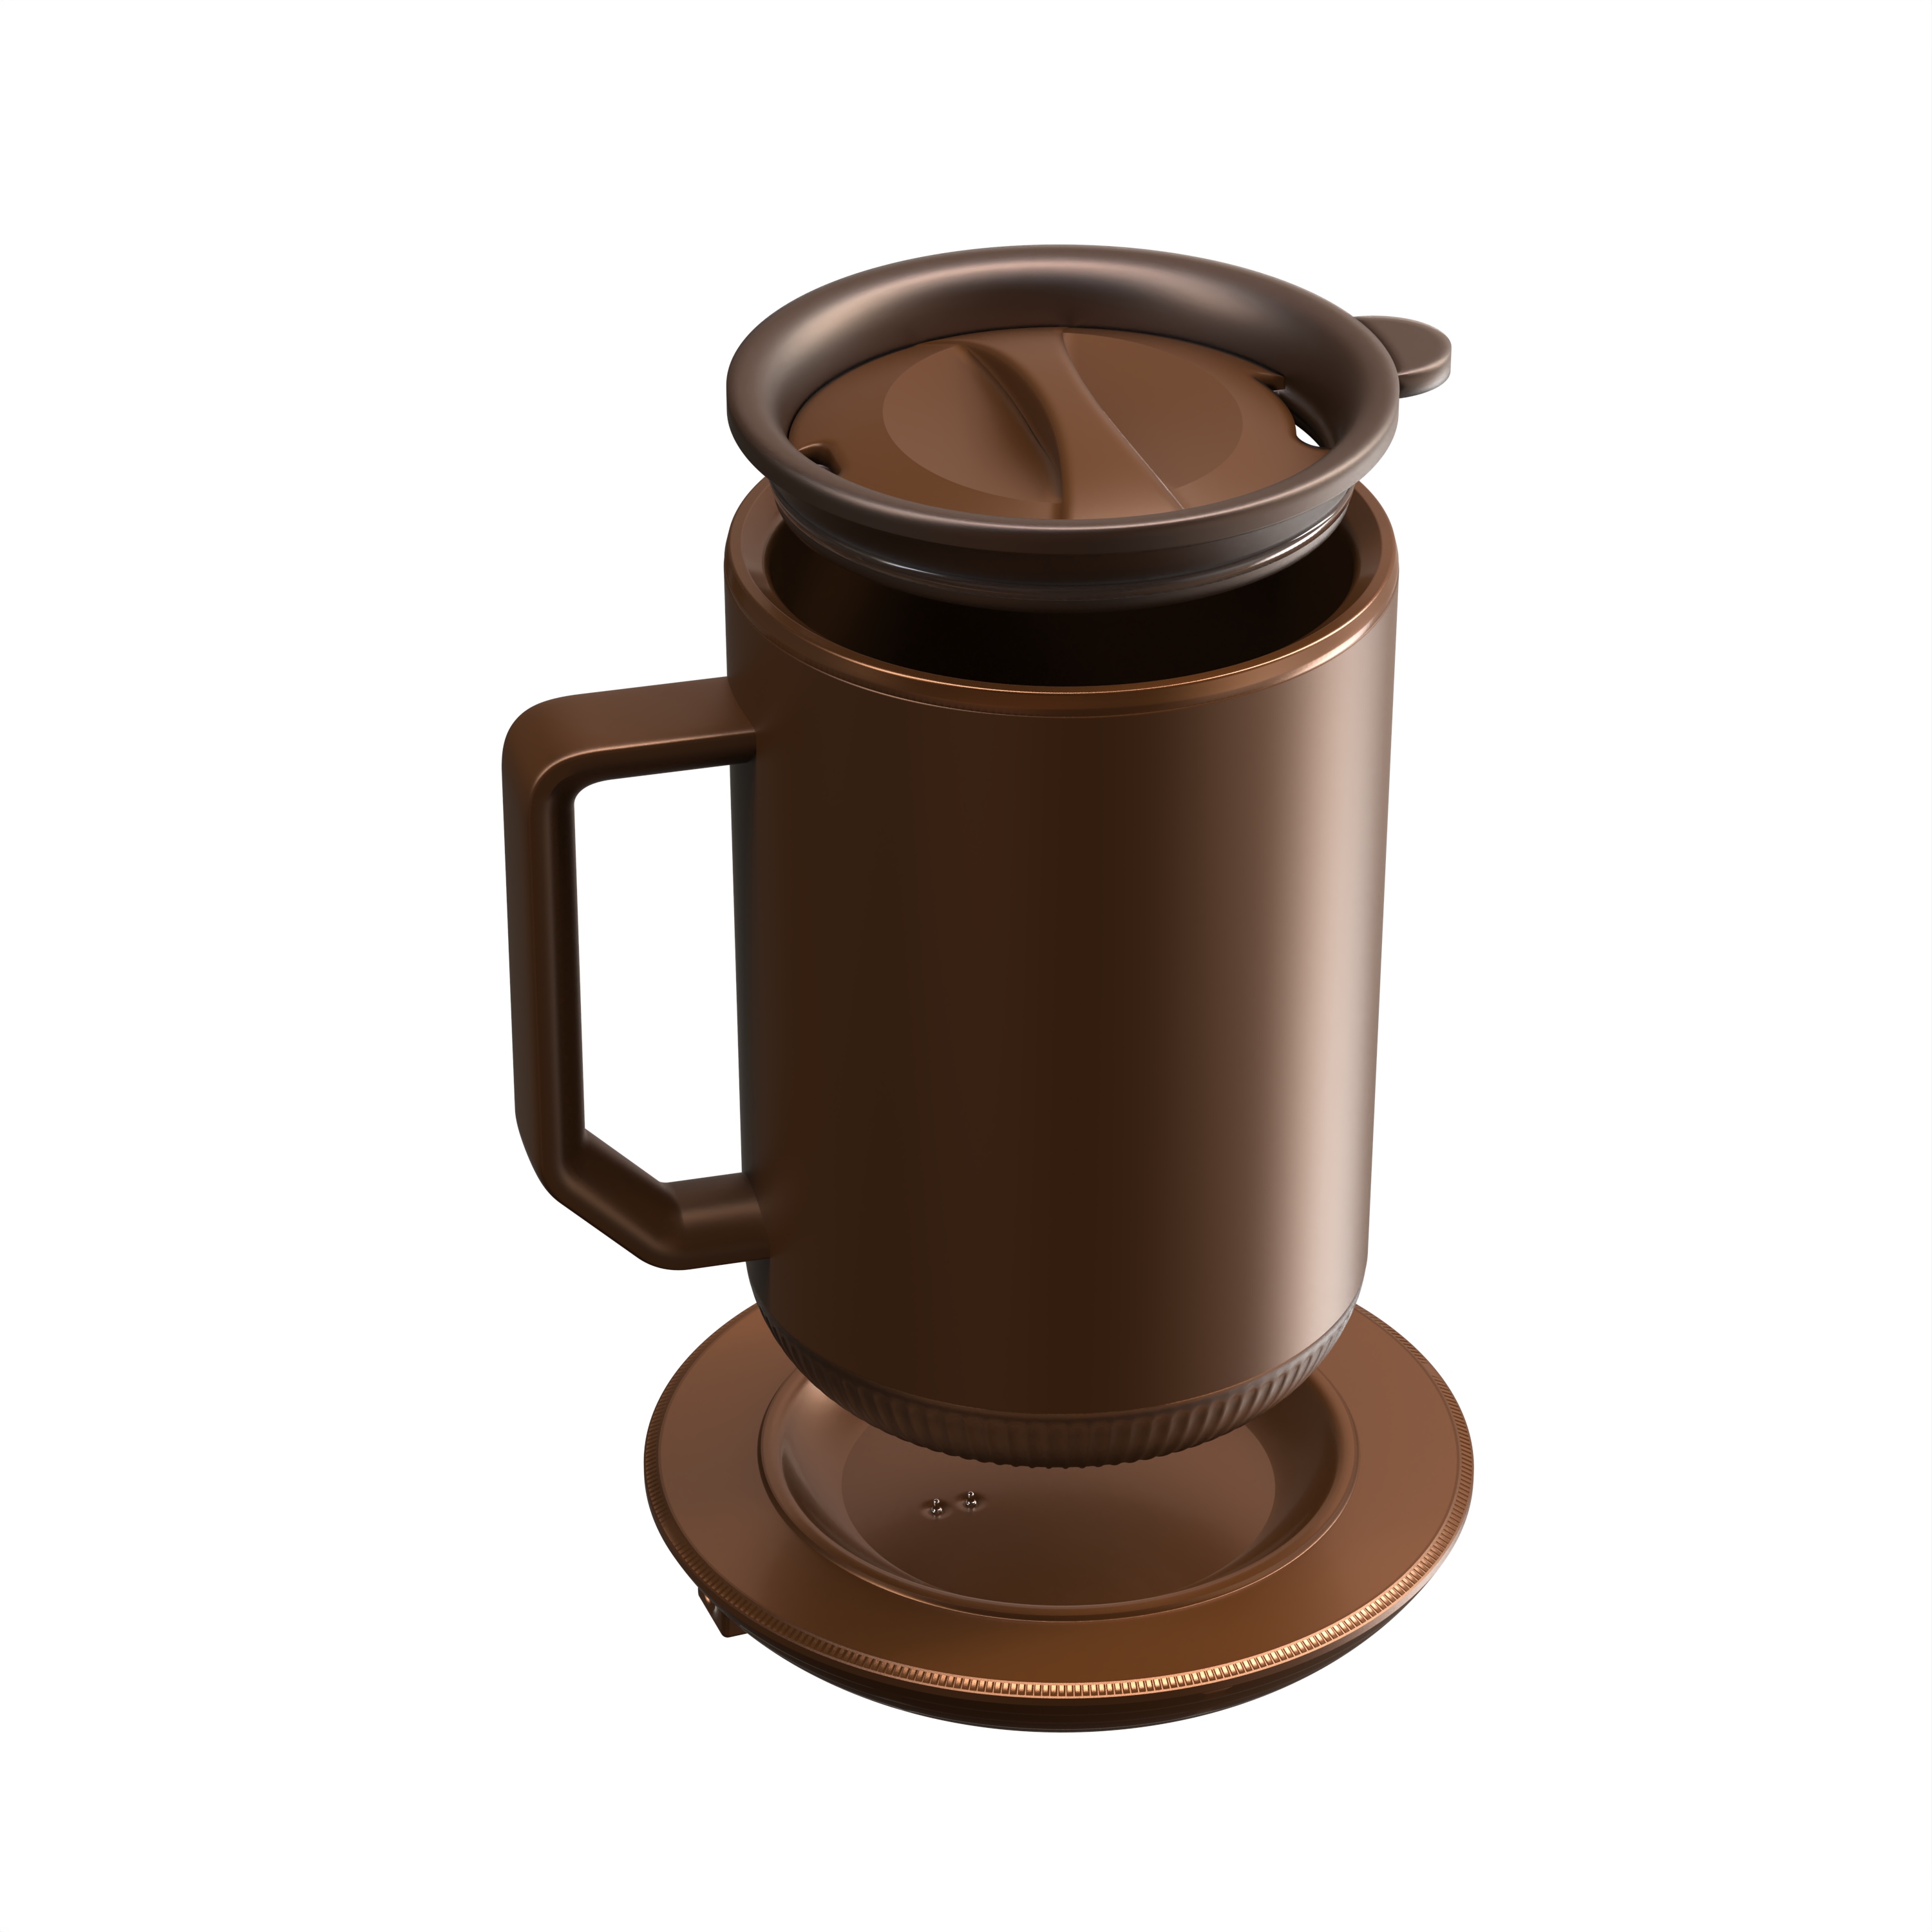 ionmug Stainless Steel (Bronze)